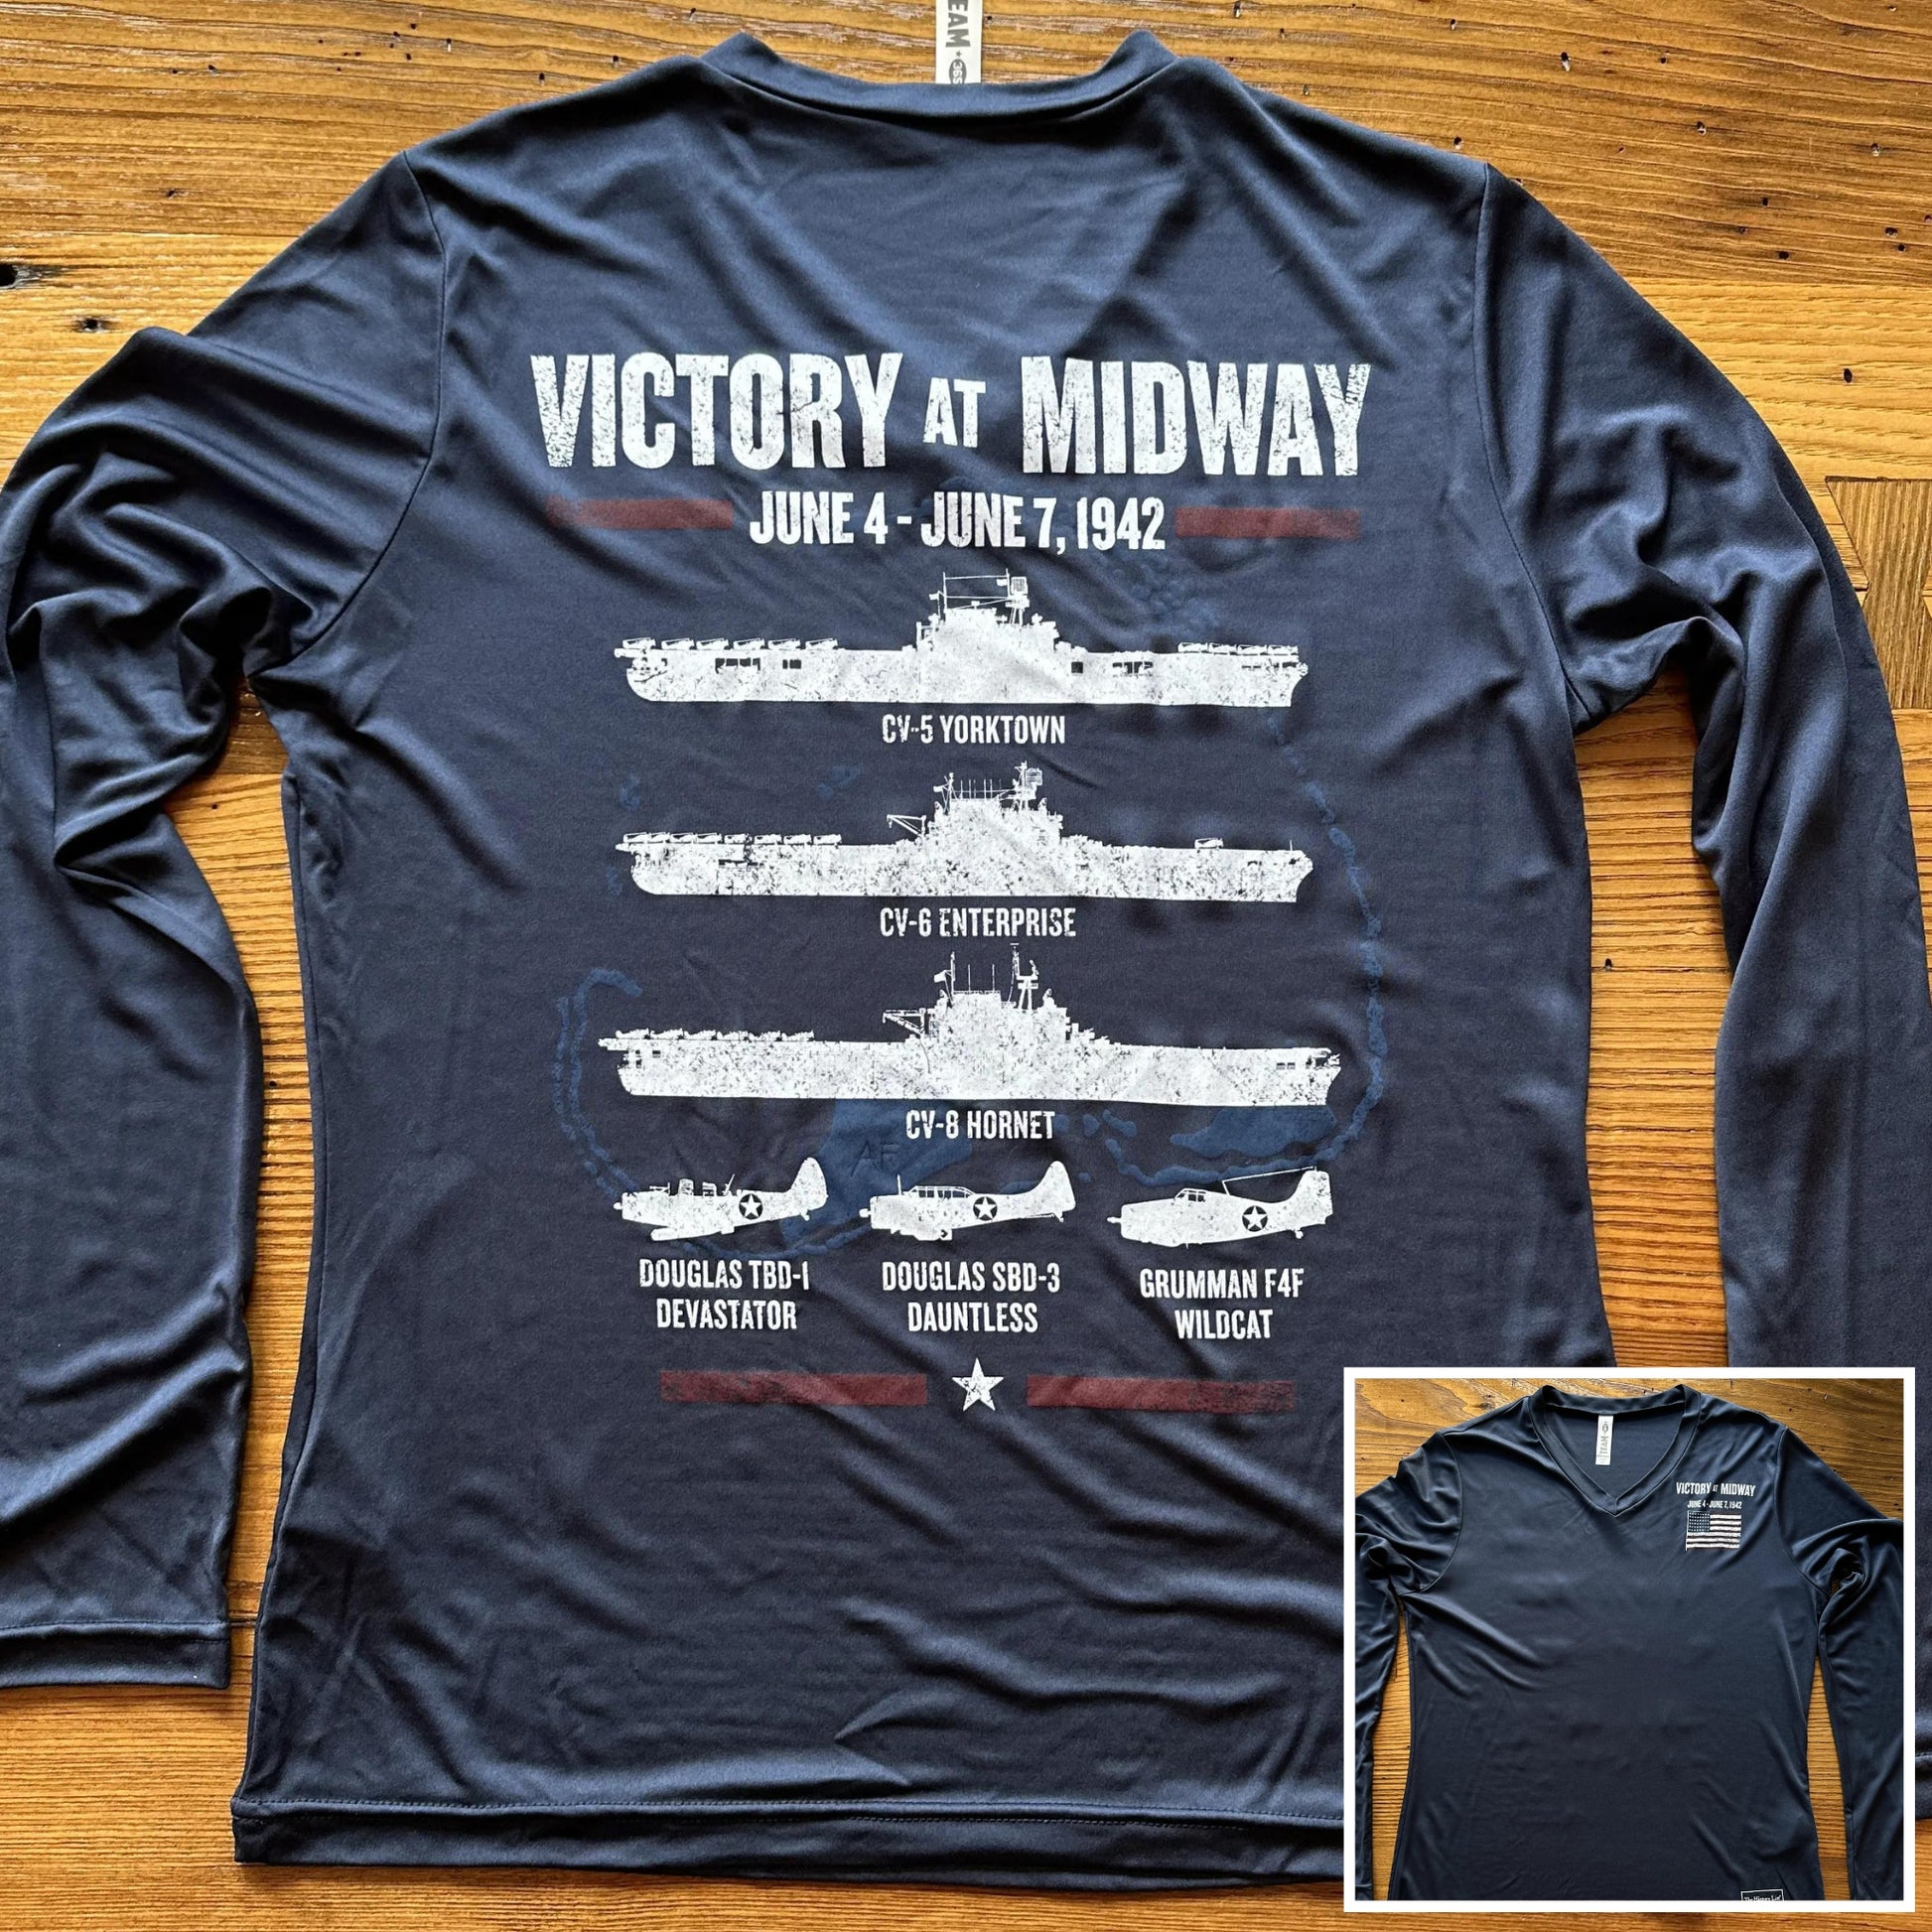 Women's "Victory at Midway" on moisture-wicking 100% polyester interlock with SPF 40+ UV protection - Long-sleeved from The History List store